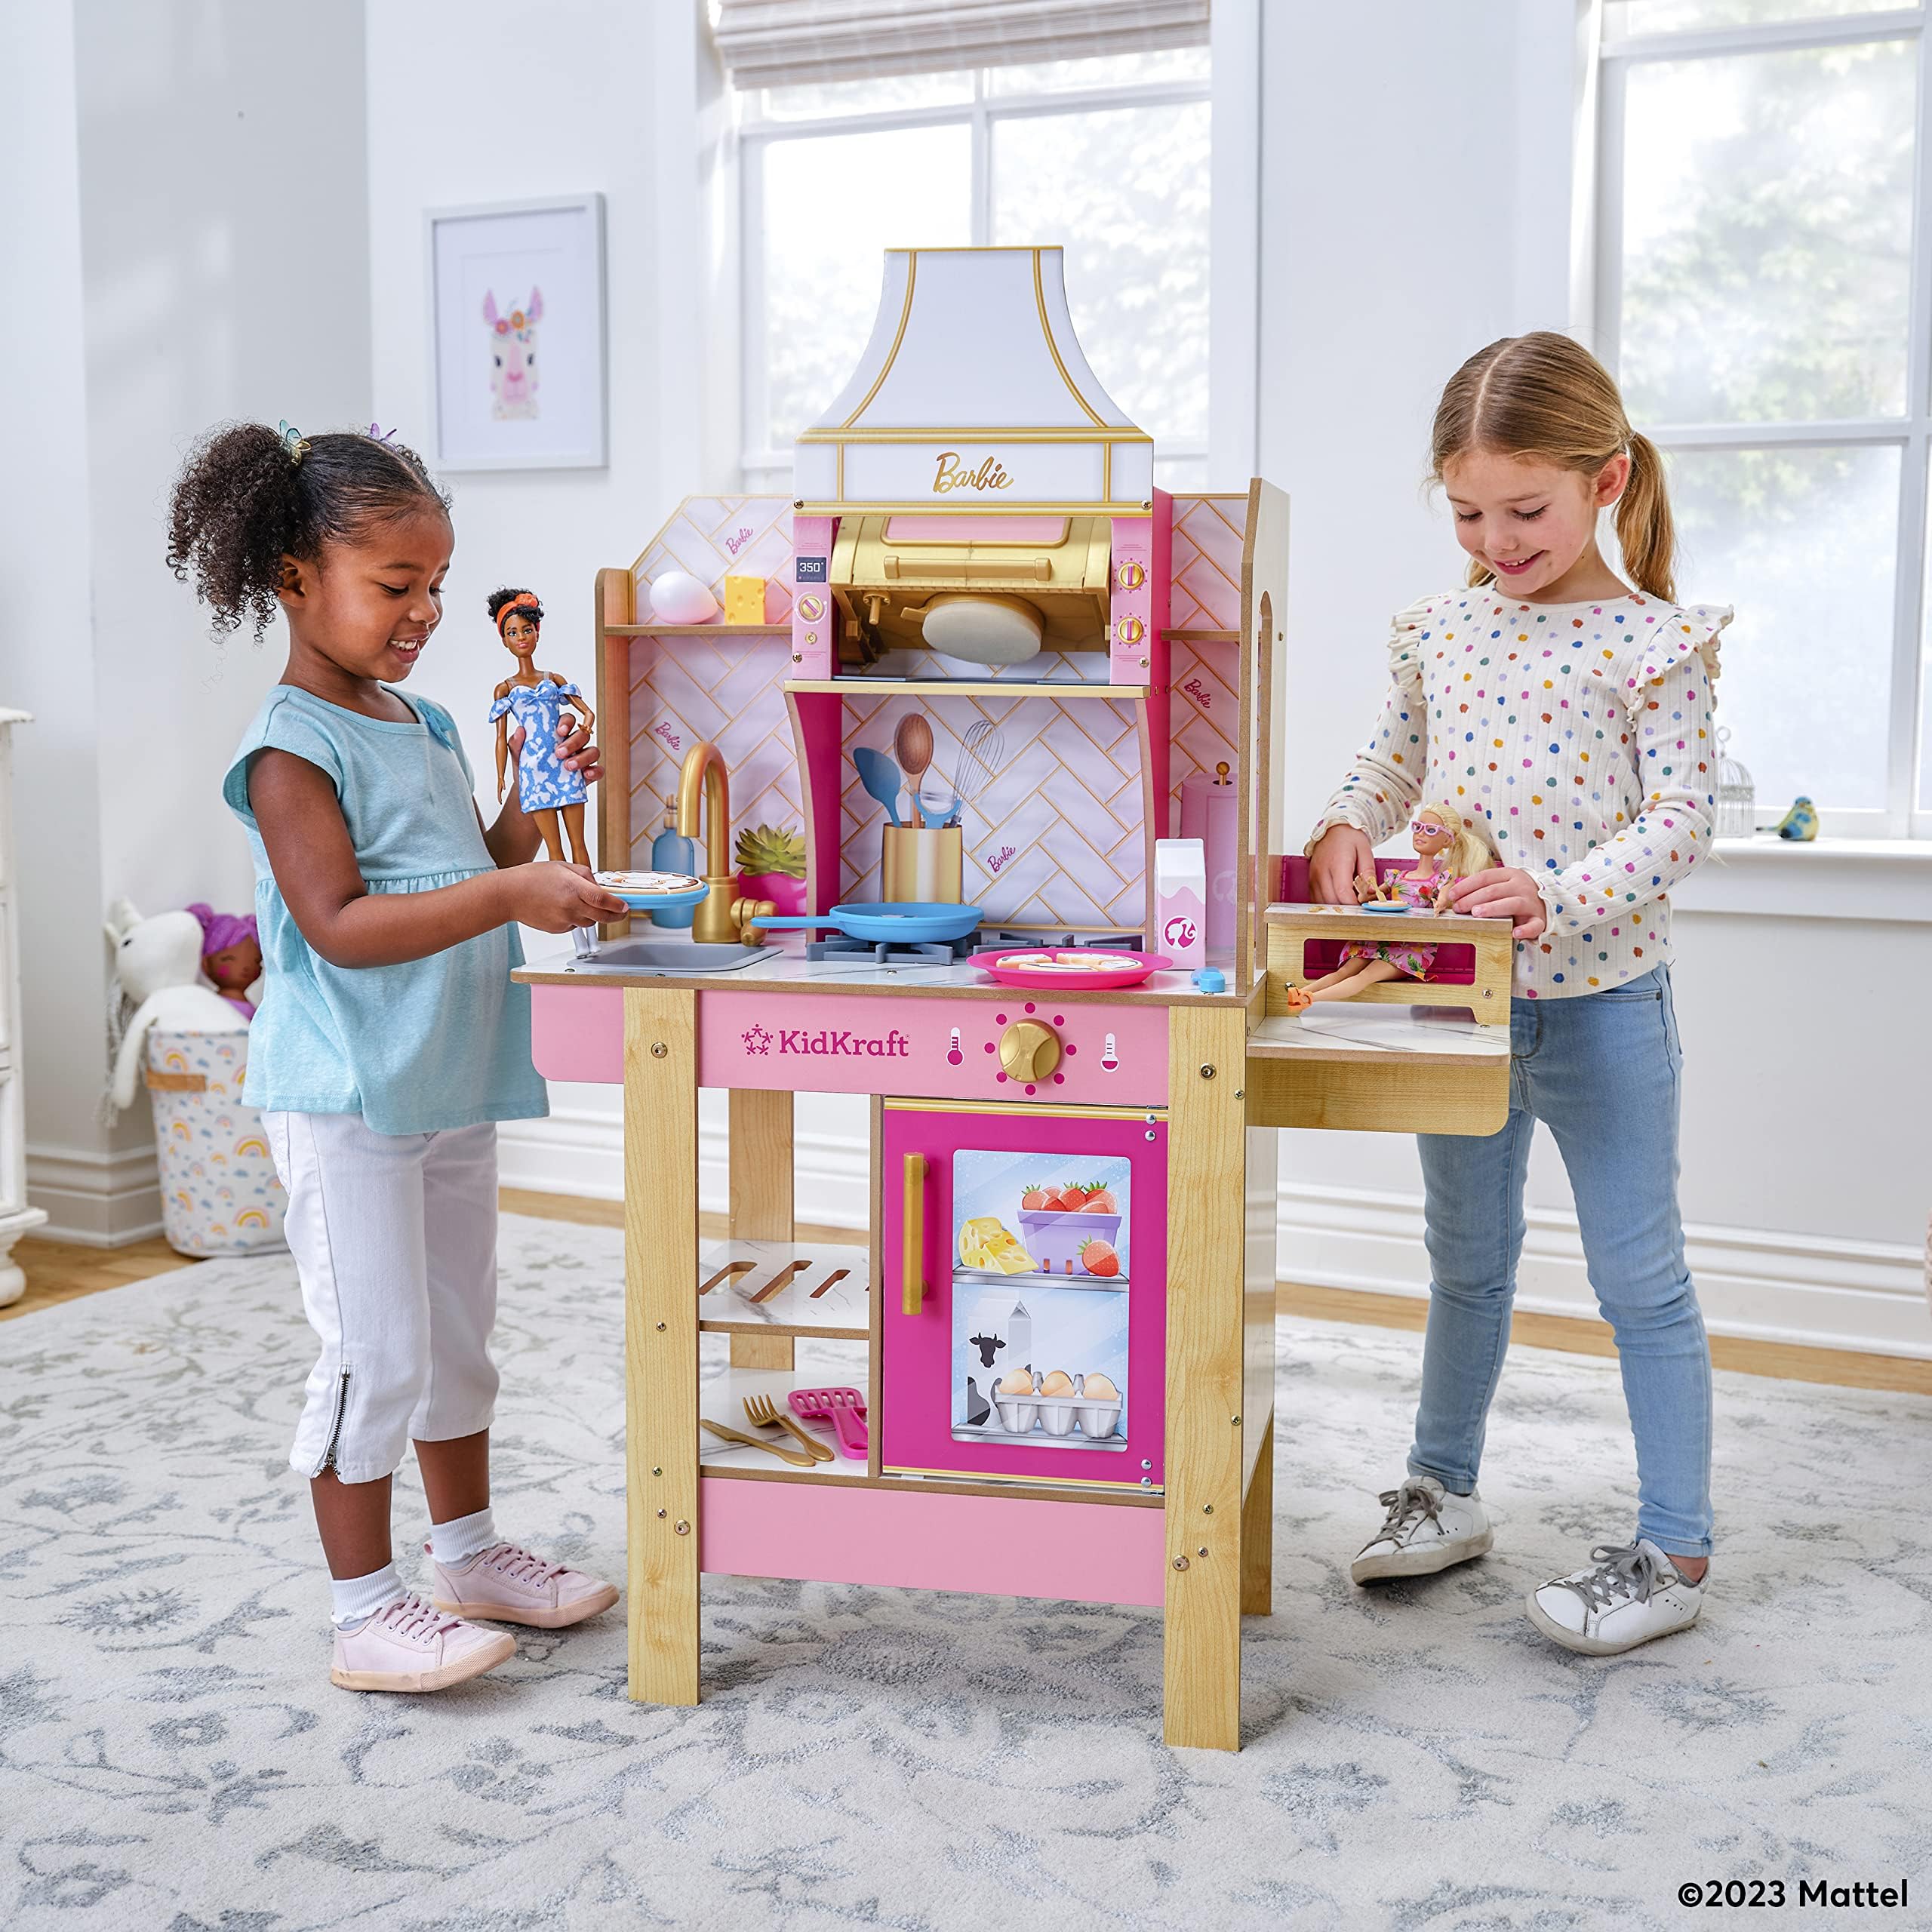 KidKraft Cook with Barbie Wooden Play Kitchen w/ Lights, Sounds, Water-Reveal Food & 30 Accessories $64 + Free Shipping